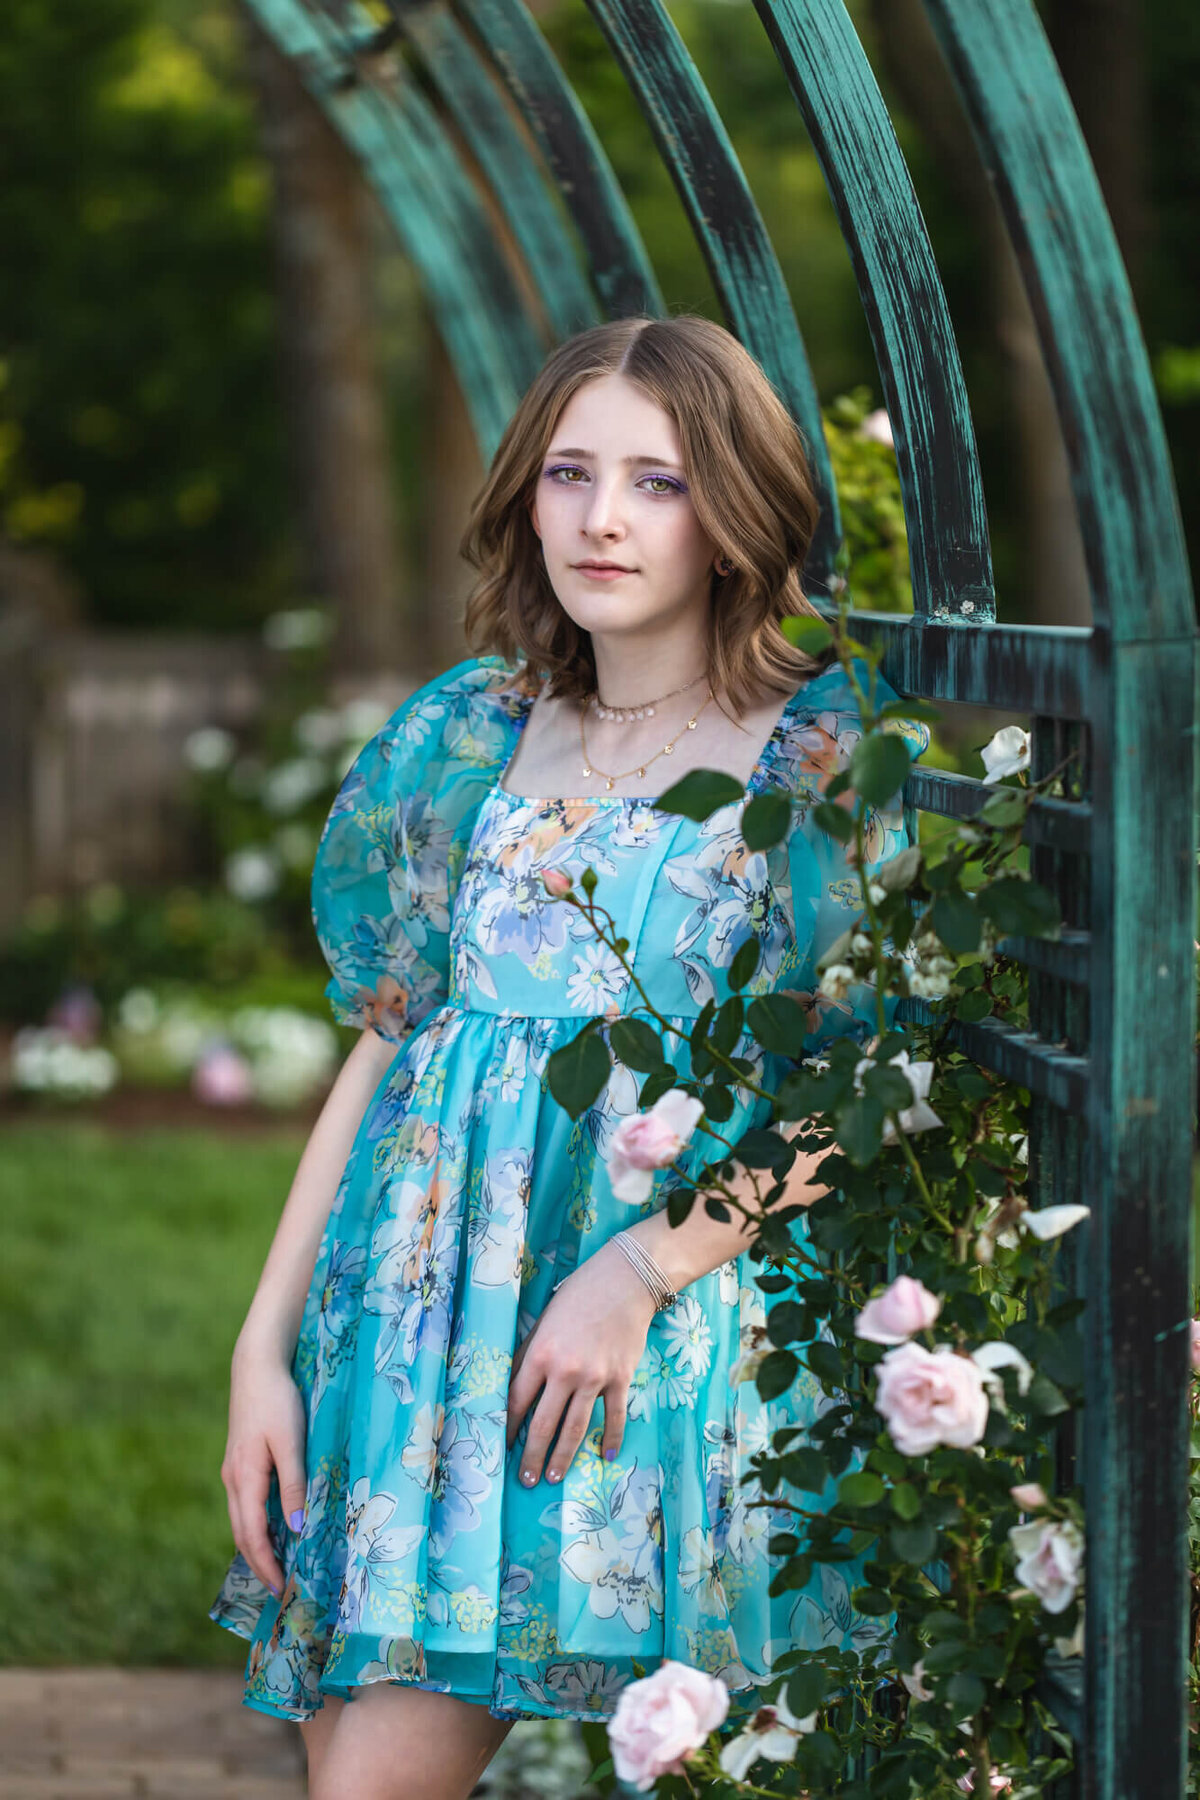 Lovely teenage girl in a blue puff sleeve dress leaning on a garden trellis surrounded by pale pink roses. Captured by Springfield, MO teen photographer Dynae Levingston.